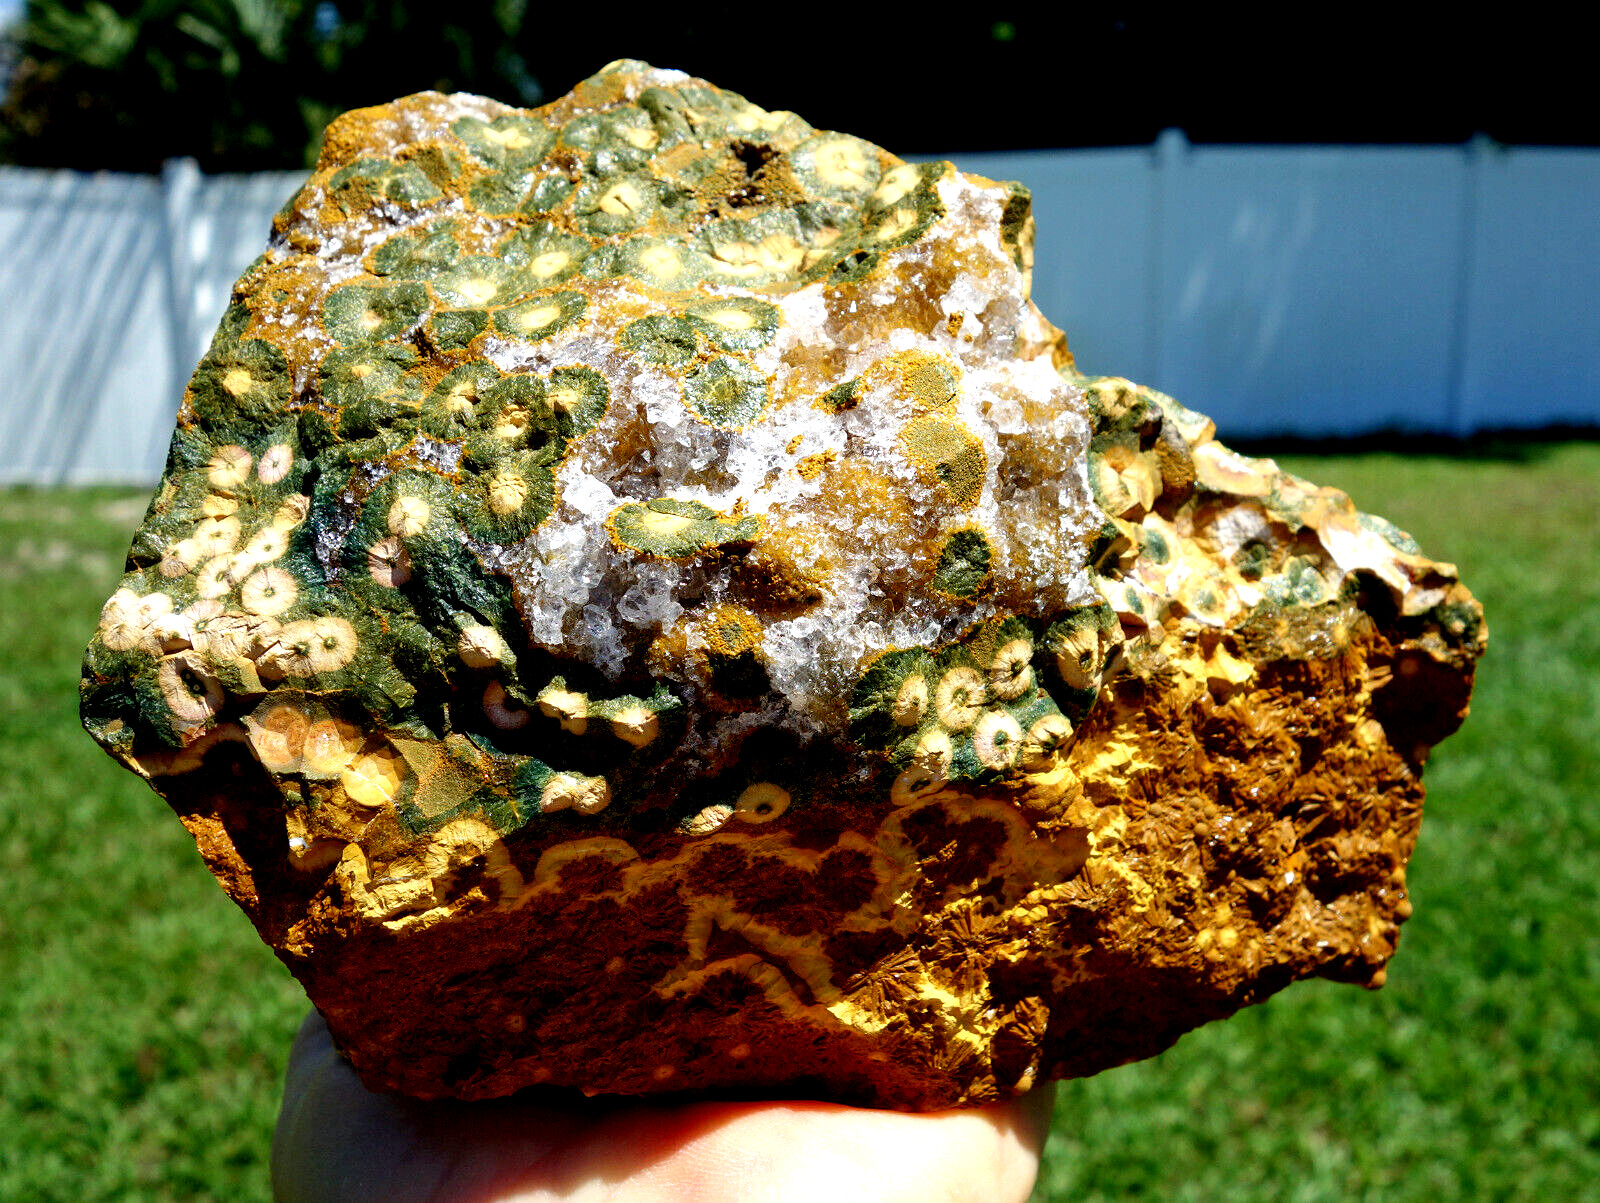 XXL Natural OCEAN JASPER with Sparkling Quartz Crystals NEW OLD STOCK For Sale